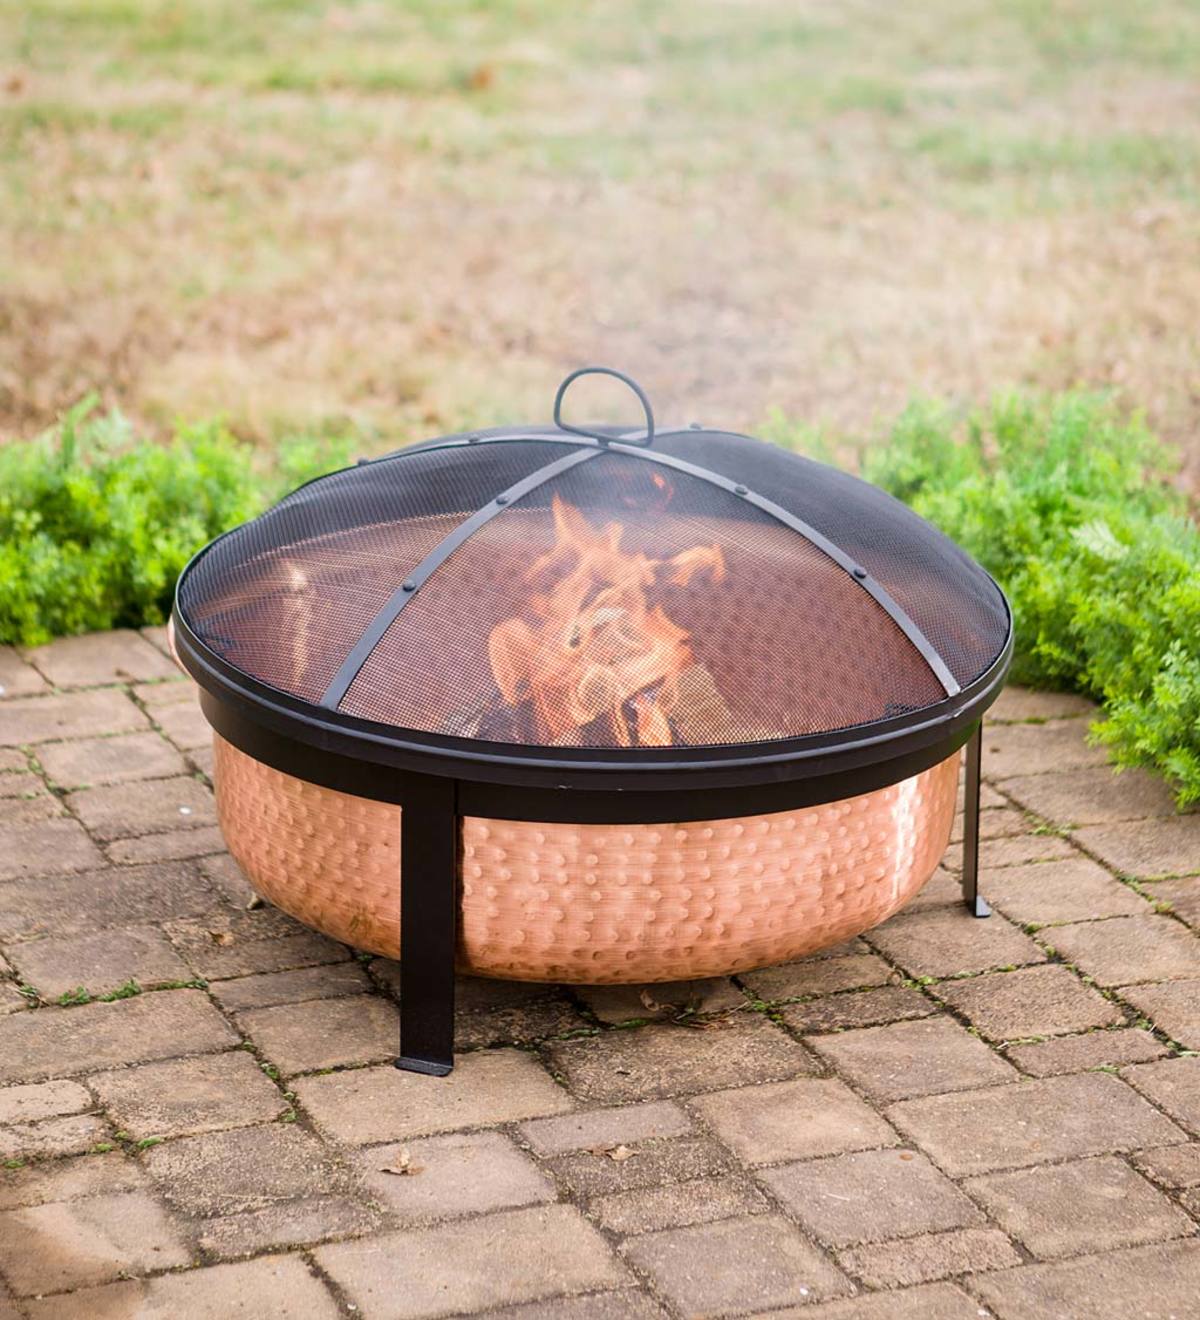 Better Homes & Gardens Wood Burning Copper Fire Pit $66 + Free Shipping